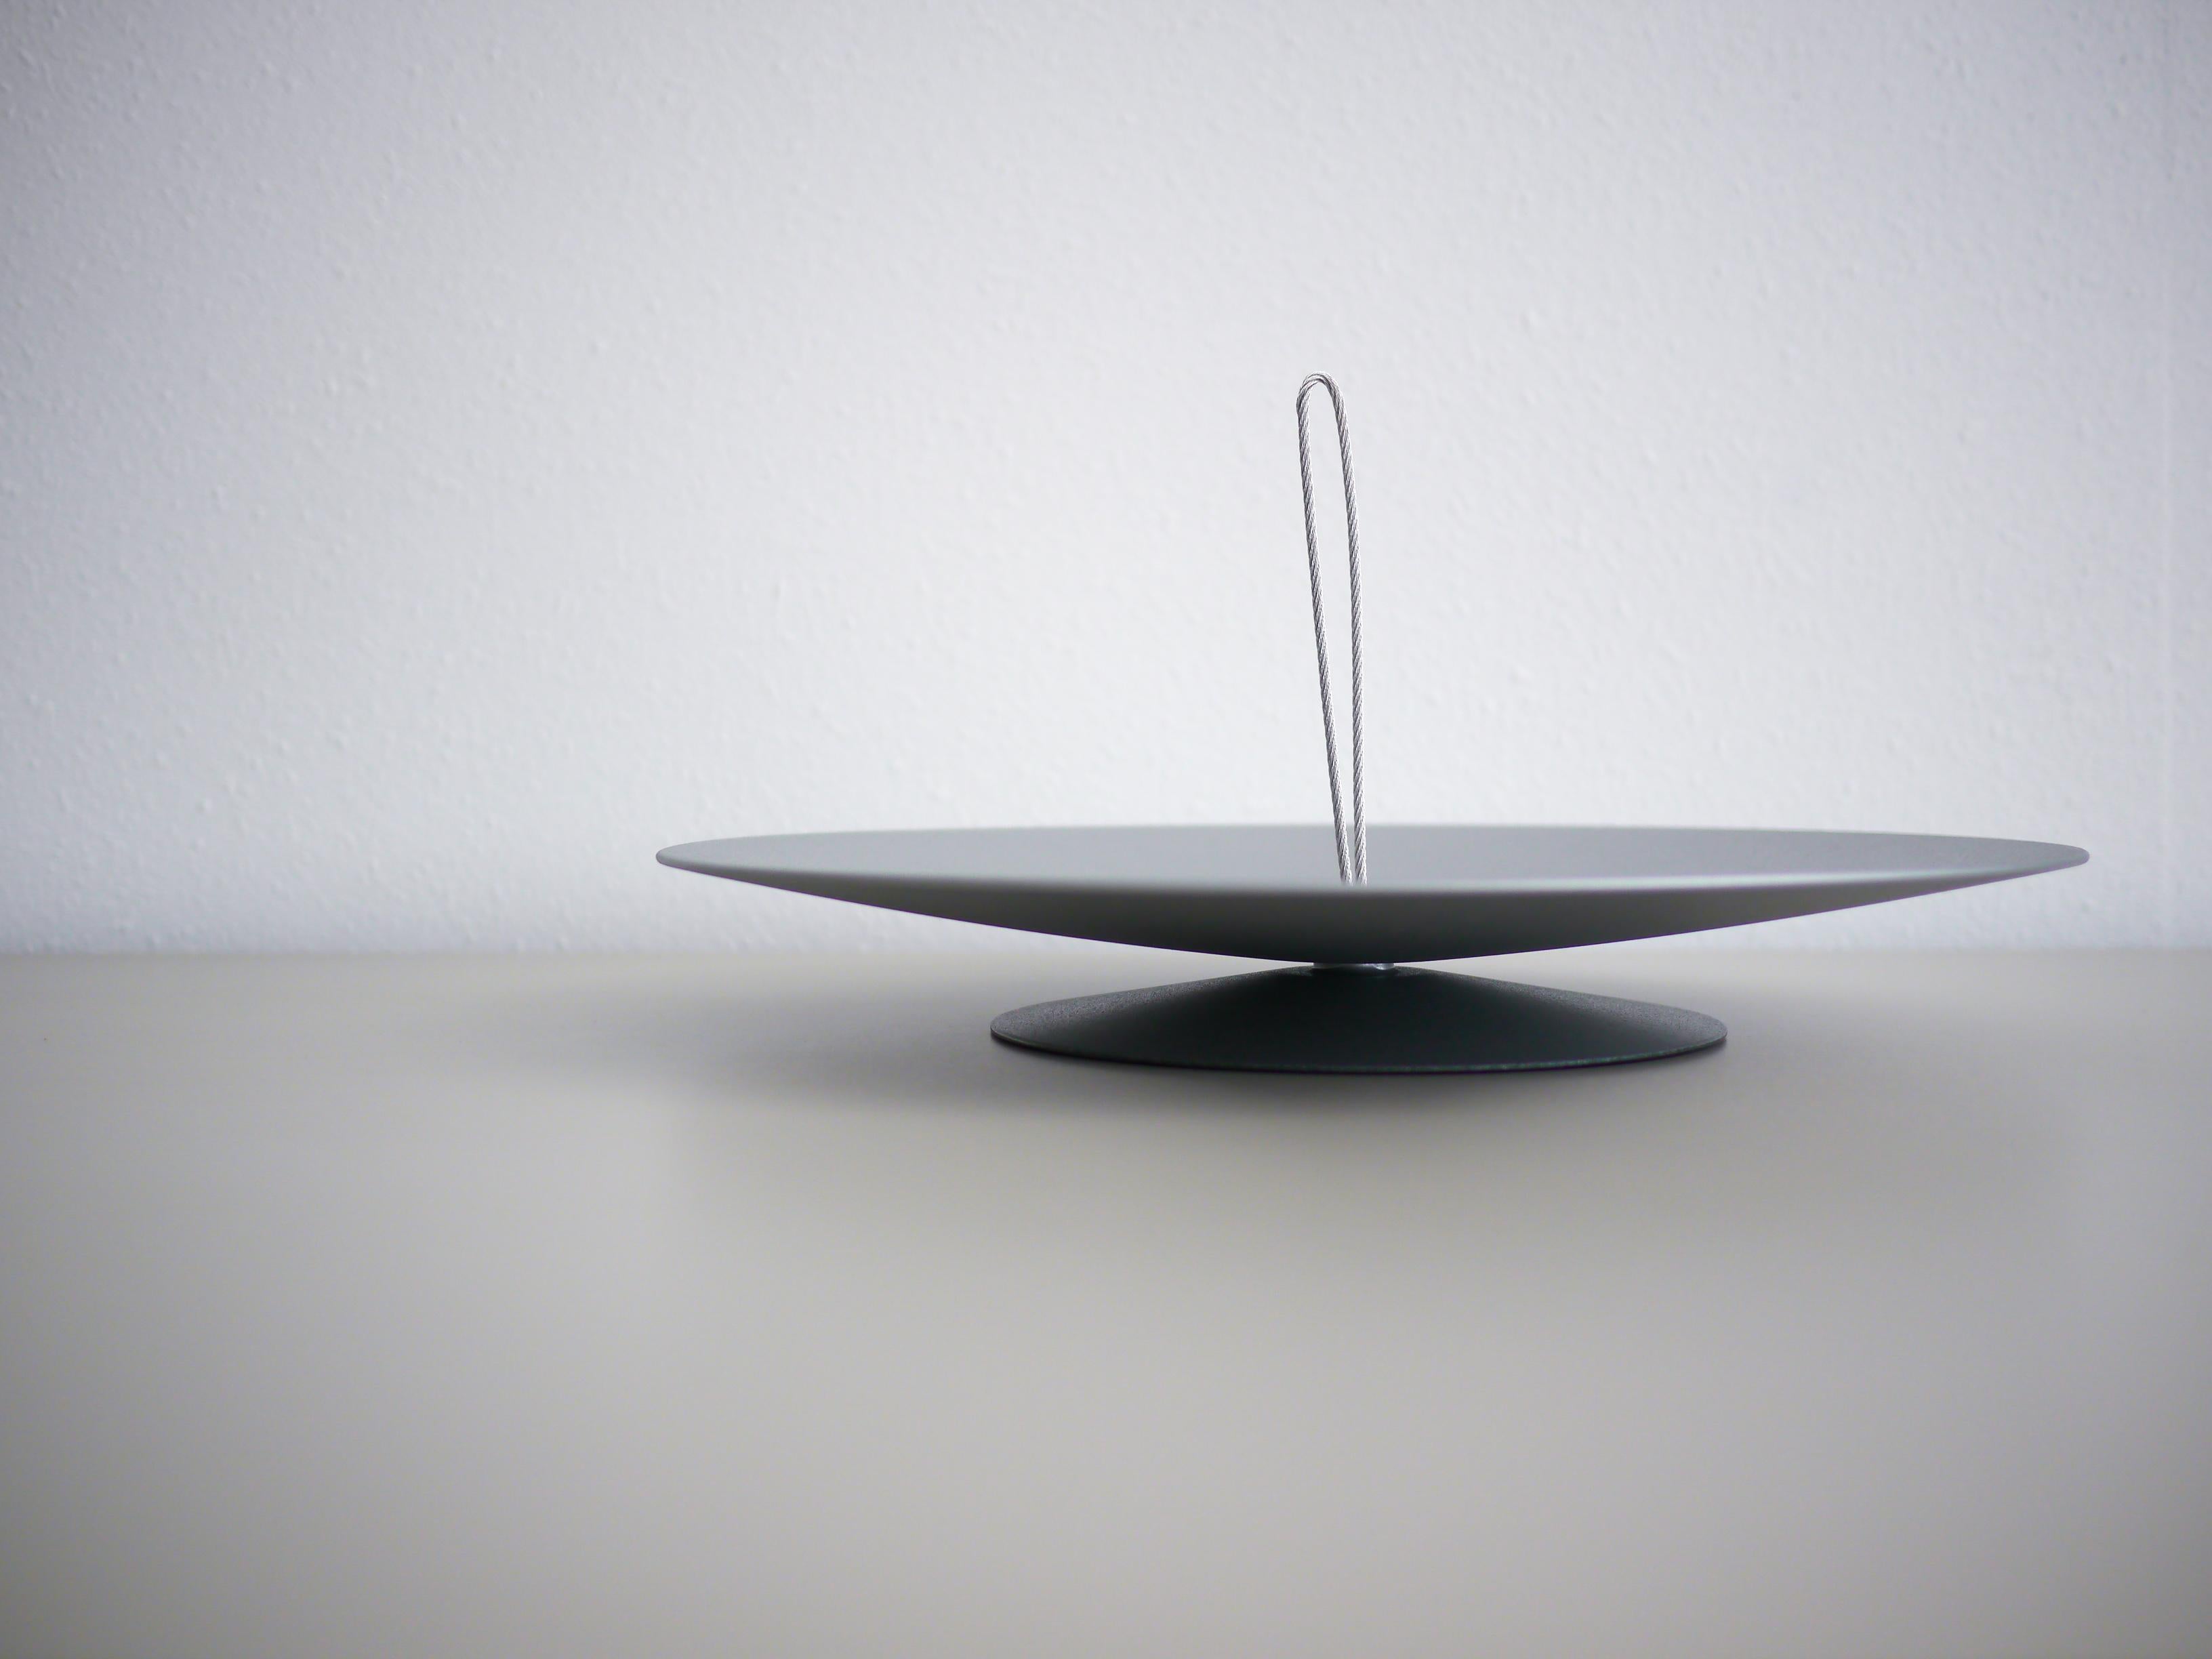 TOA Compote by Michele De Lucchi for Marutomi.
Marutomi is the lead company of 